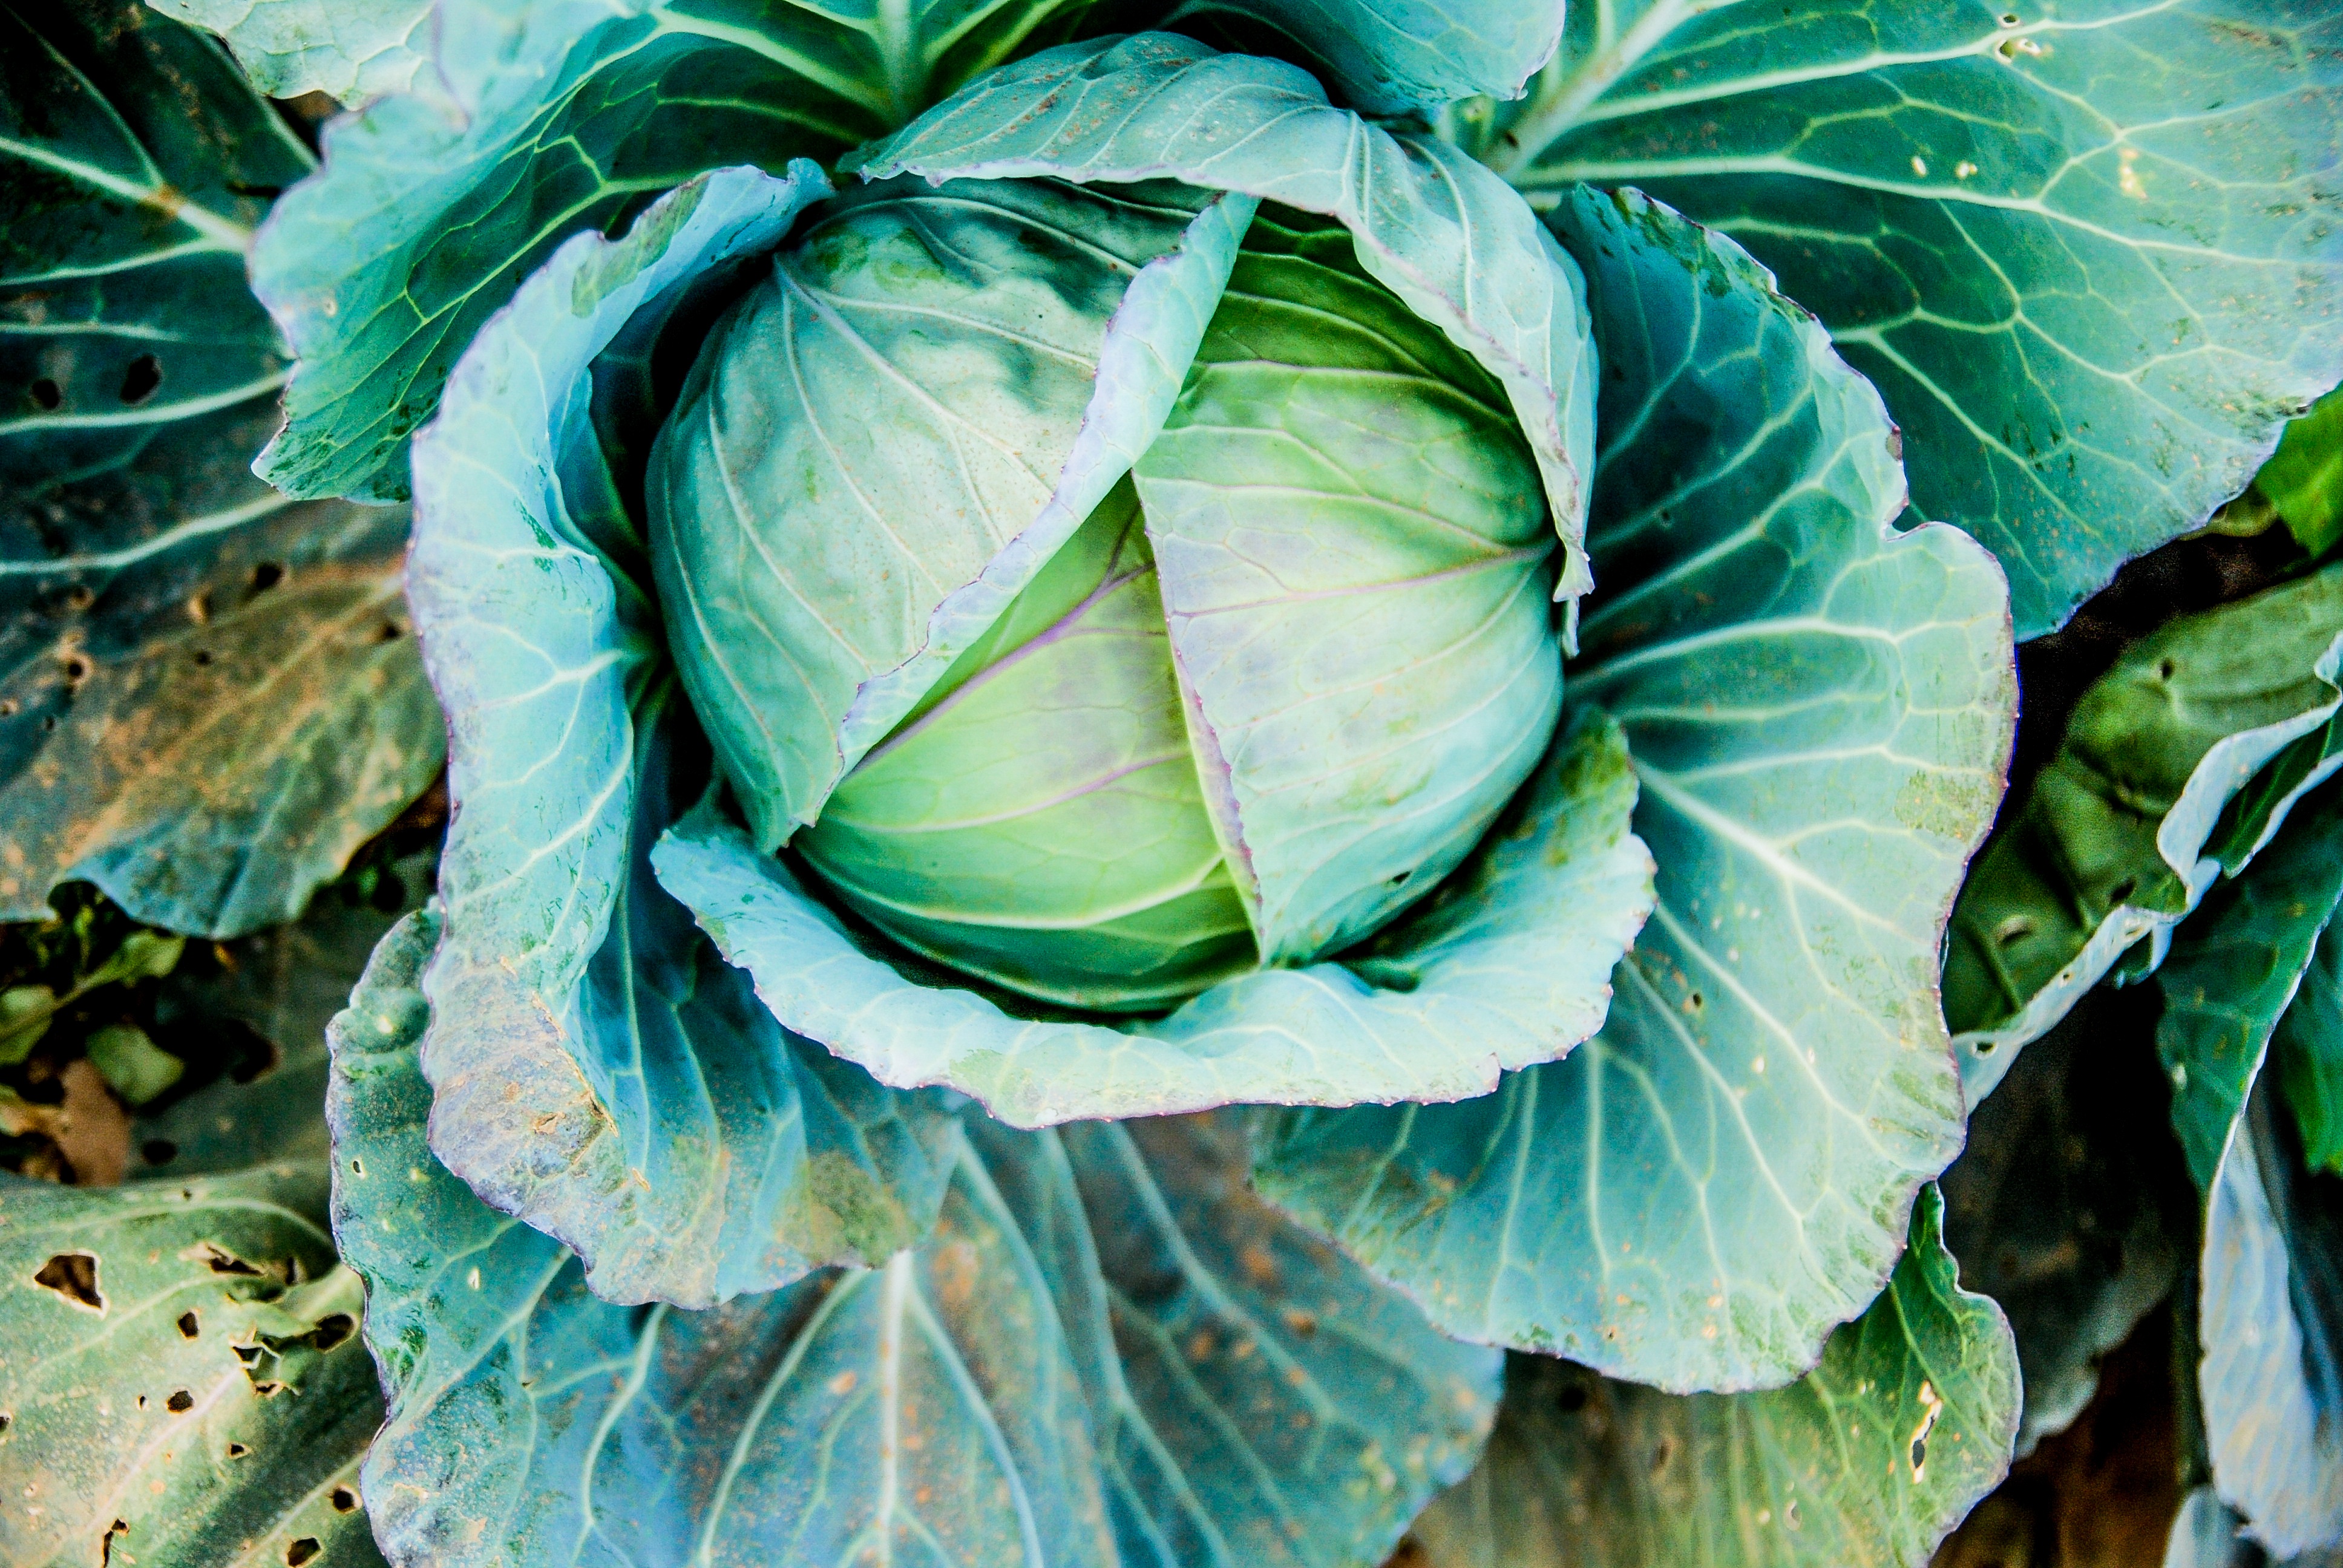 Cabbage Vegetable 3872x2592